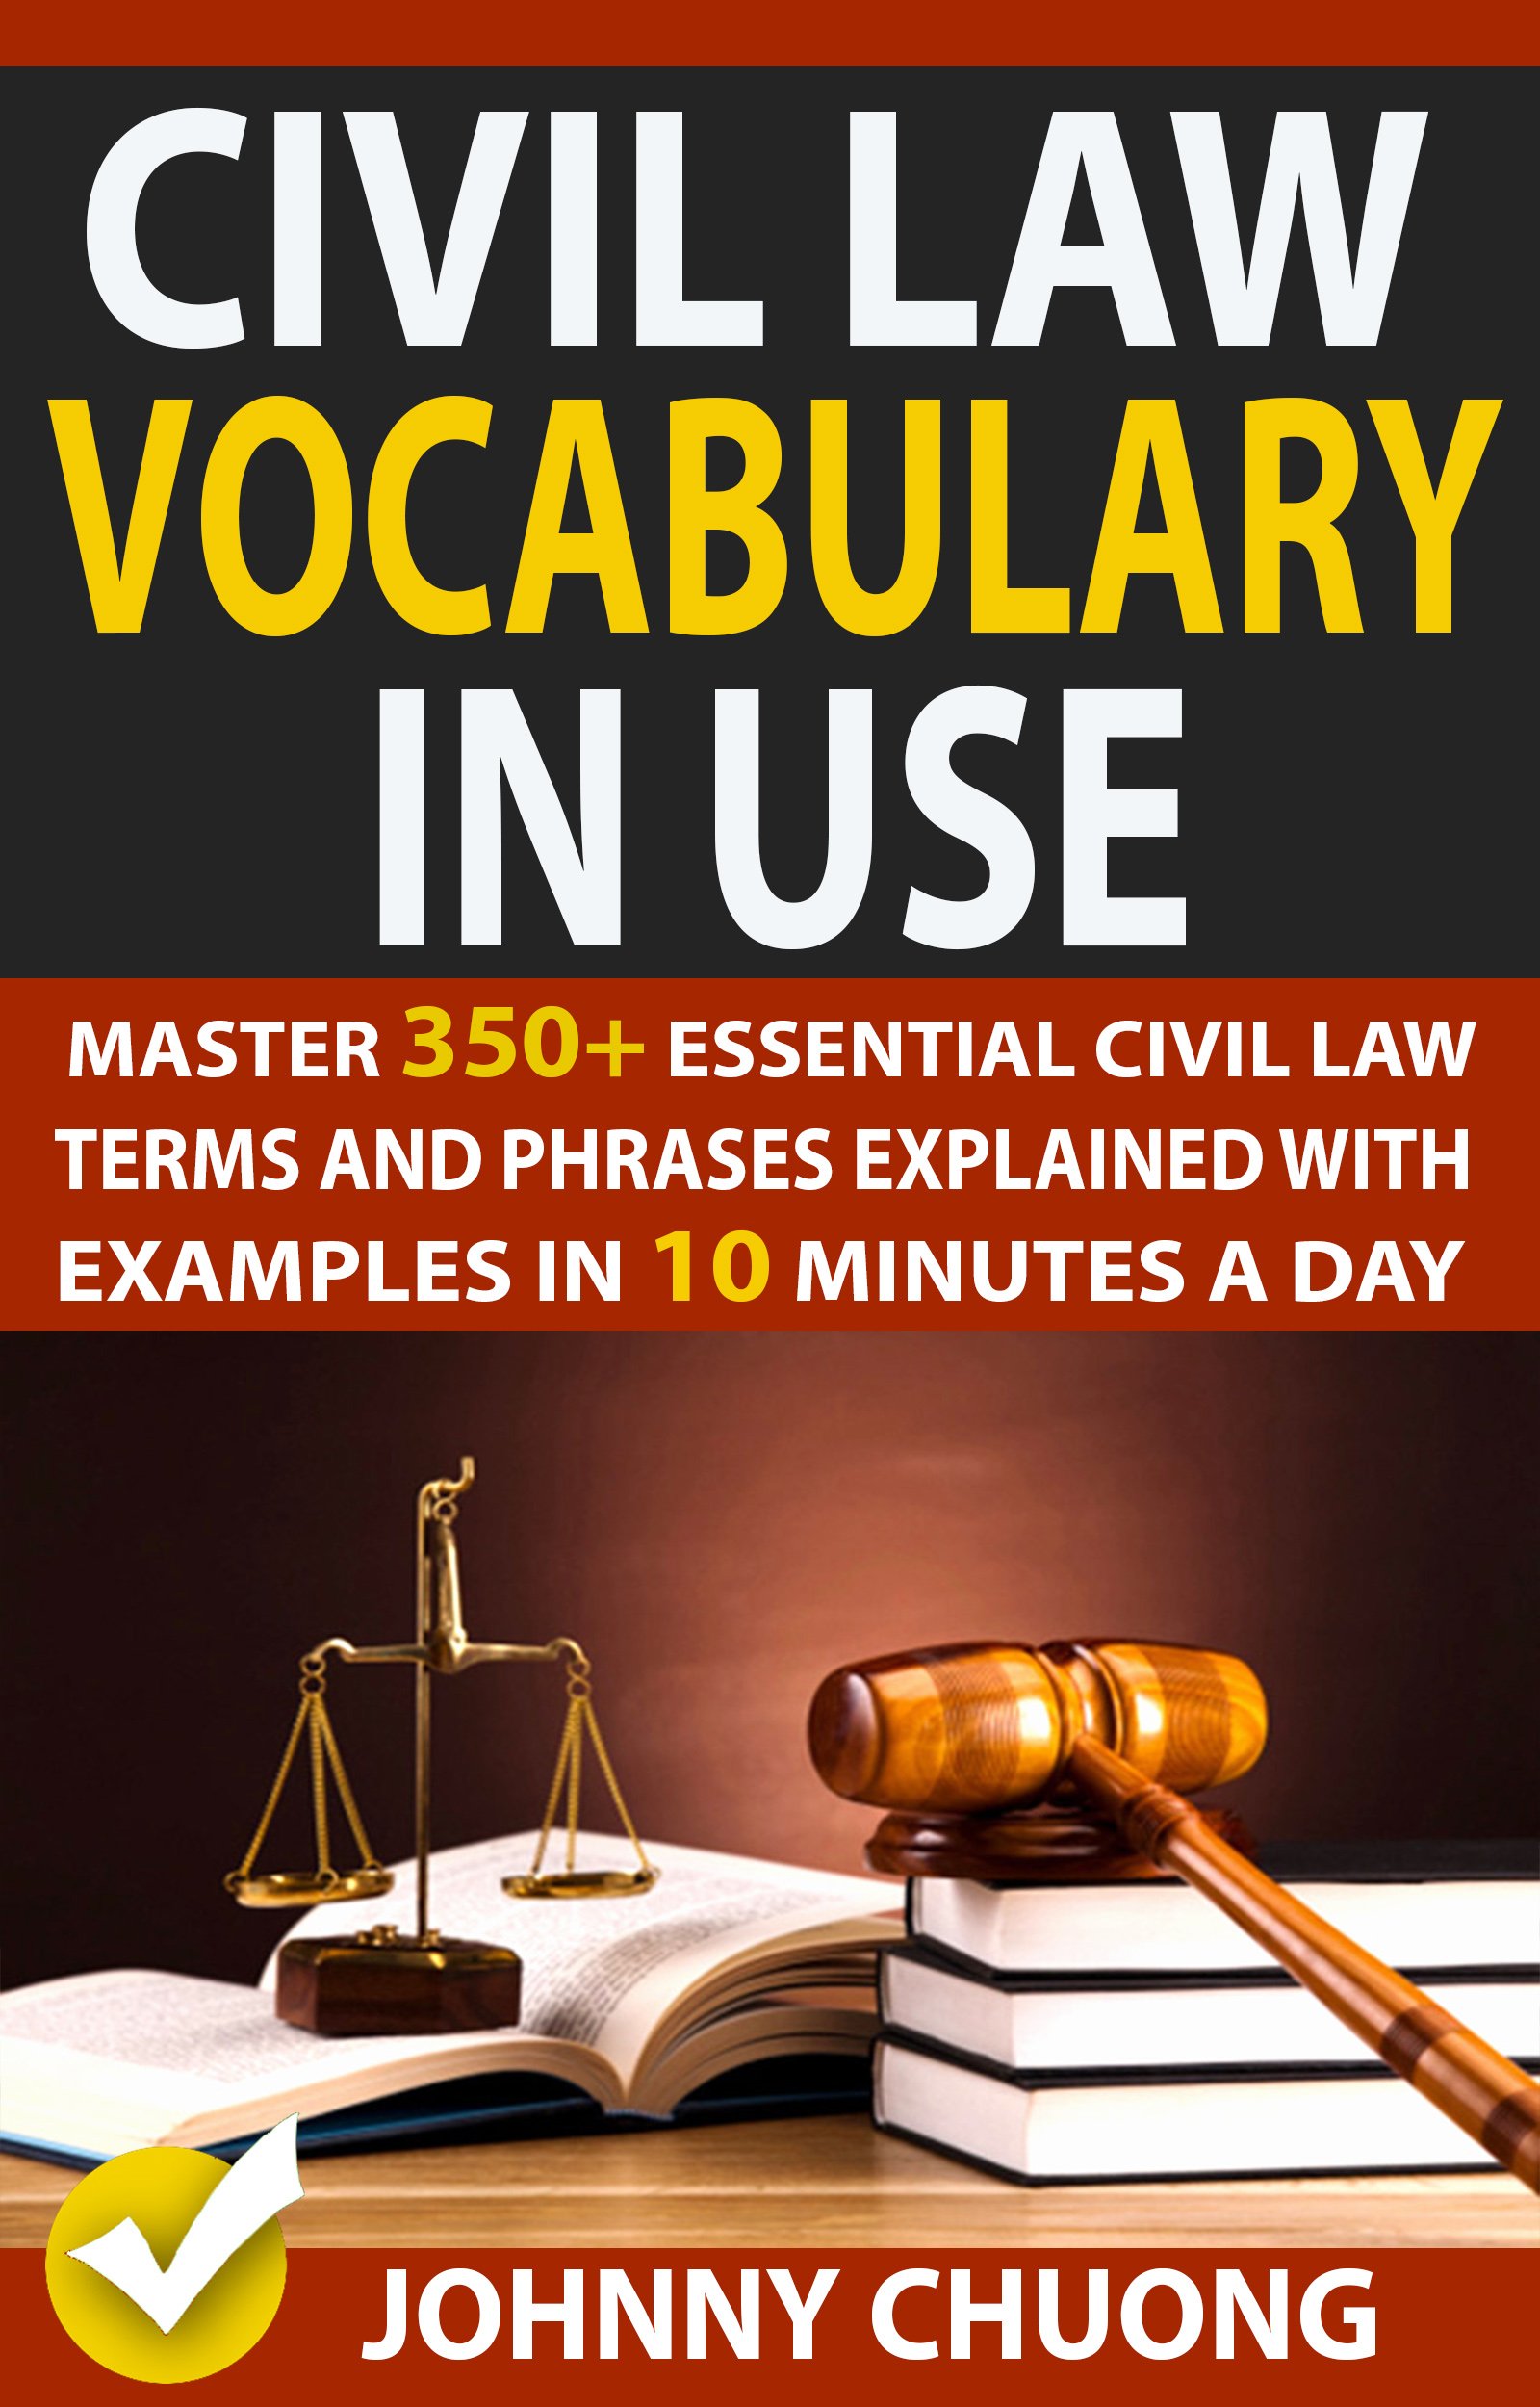 Civil Law Vocabulary In Use: Master 350+ Essential Civil Law Terms And Phrases Explained With Examples In 10 Minutes A Day